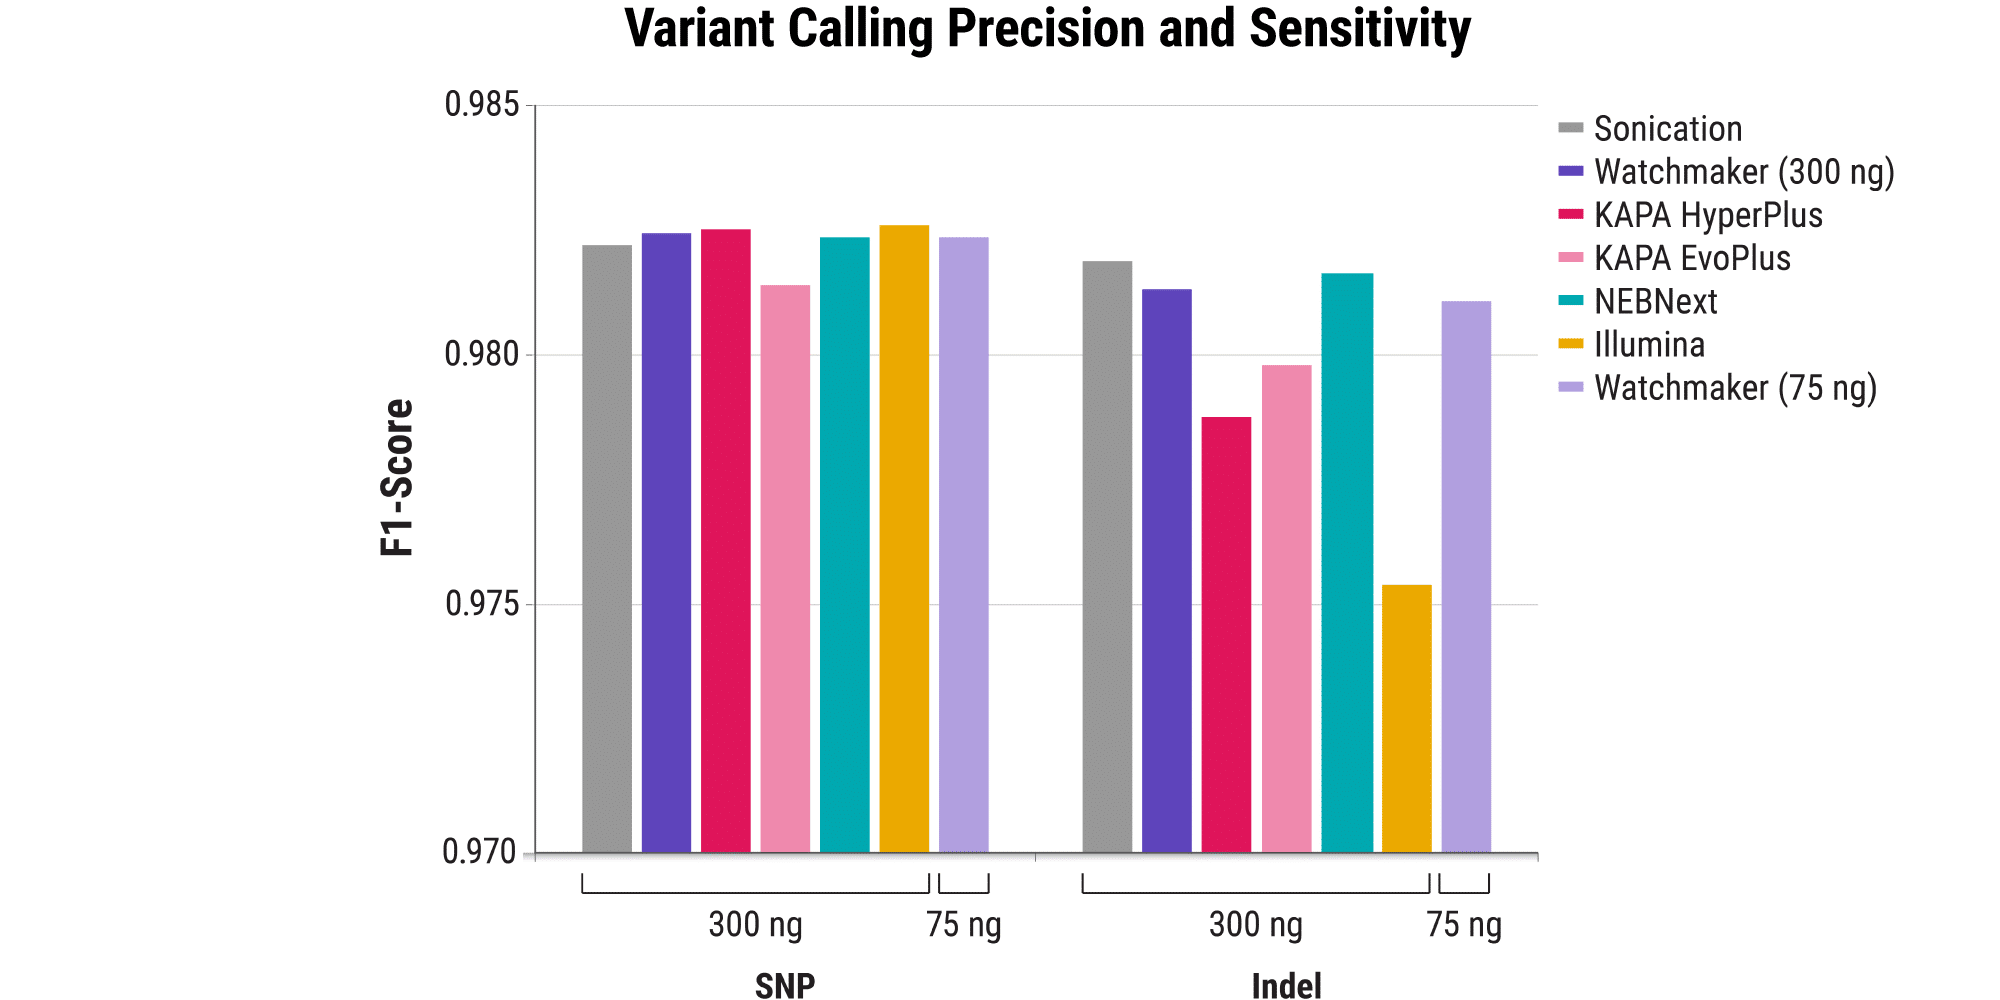 Figure 3. Sensitive and precise variant calling. All libraries were sequenced on a NovaSeq 6000, subsampled to 387M read pairs, and assessed with respect to SNP and Indel F1-scores. The Watchmaker libraries deliver variant calling performance on-par with the sonication control.  See Figure 1 for additional experimental details.